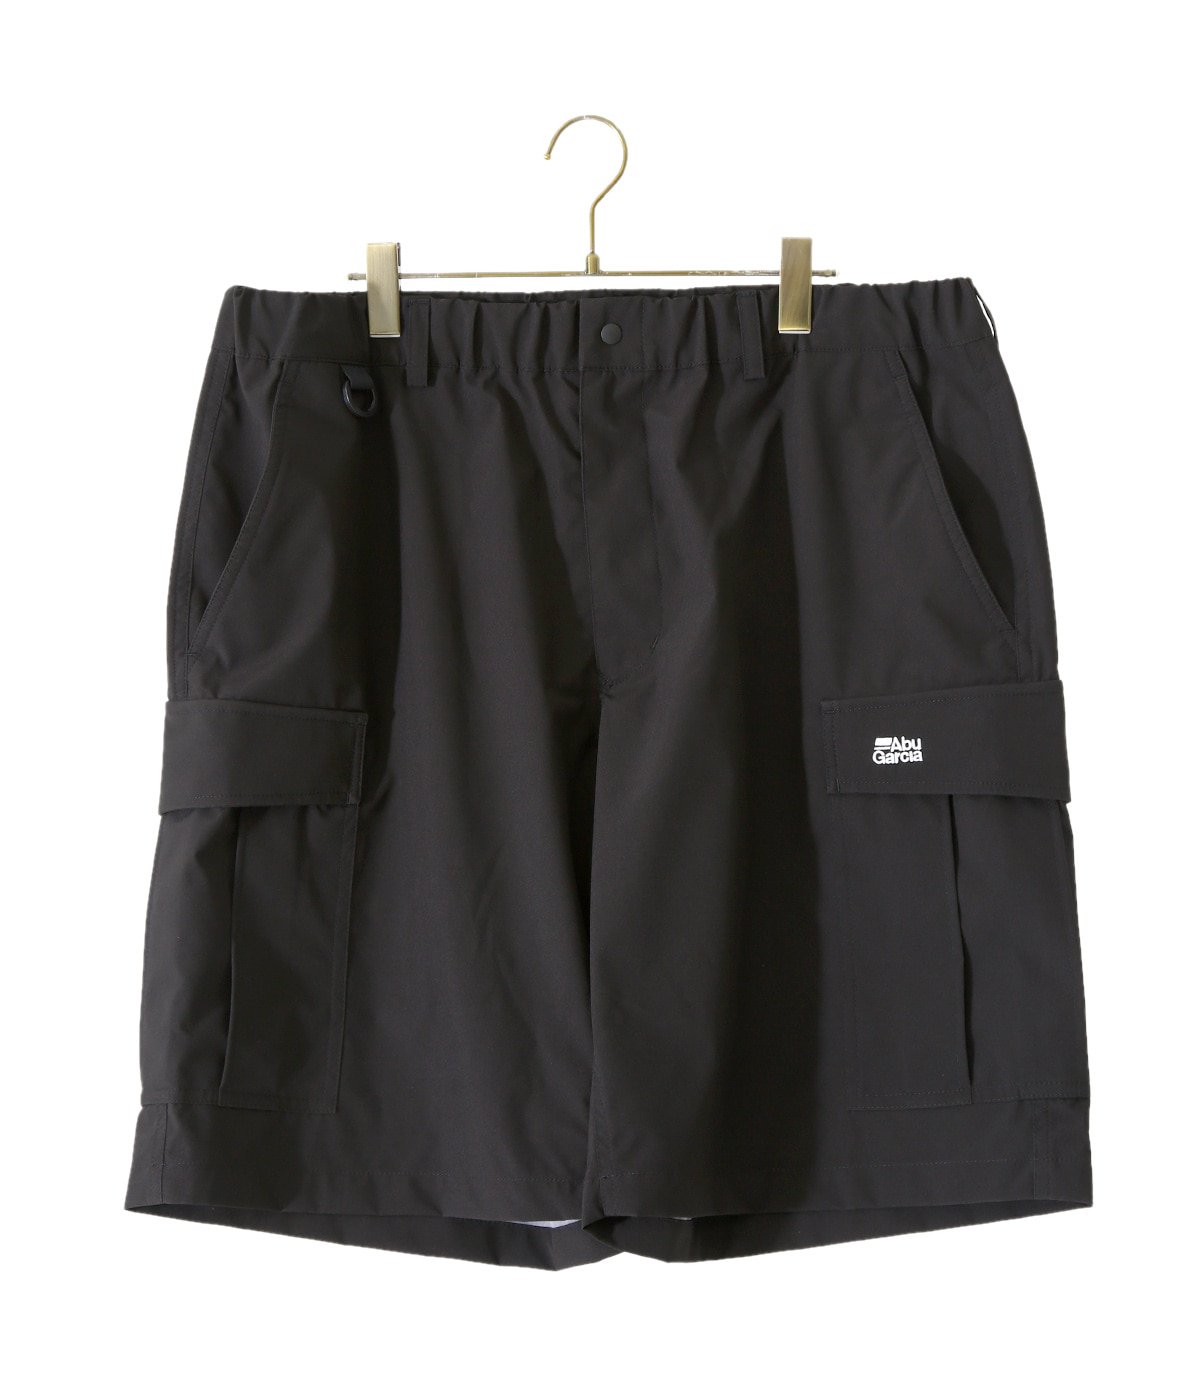 【ONLY ARK】別注 3LAYER CARGO SHORTS